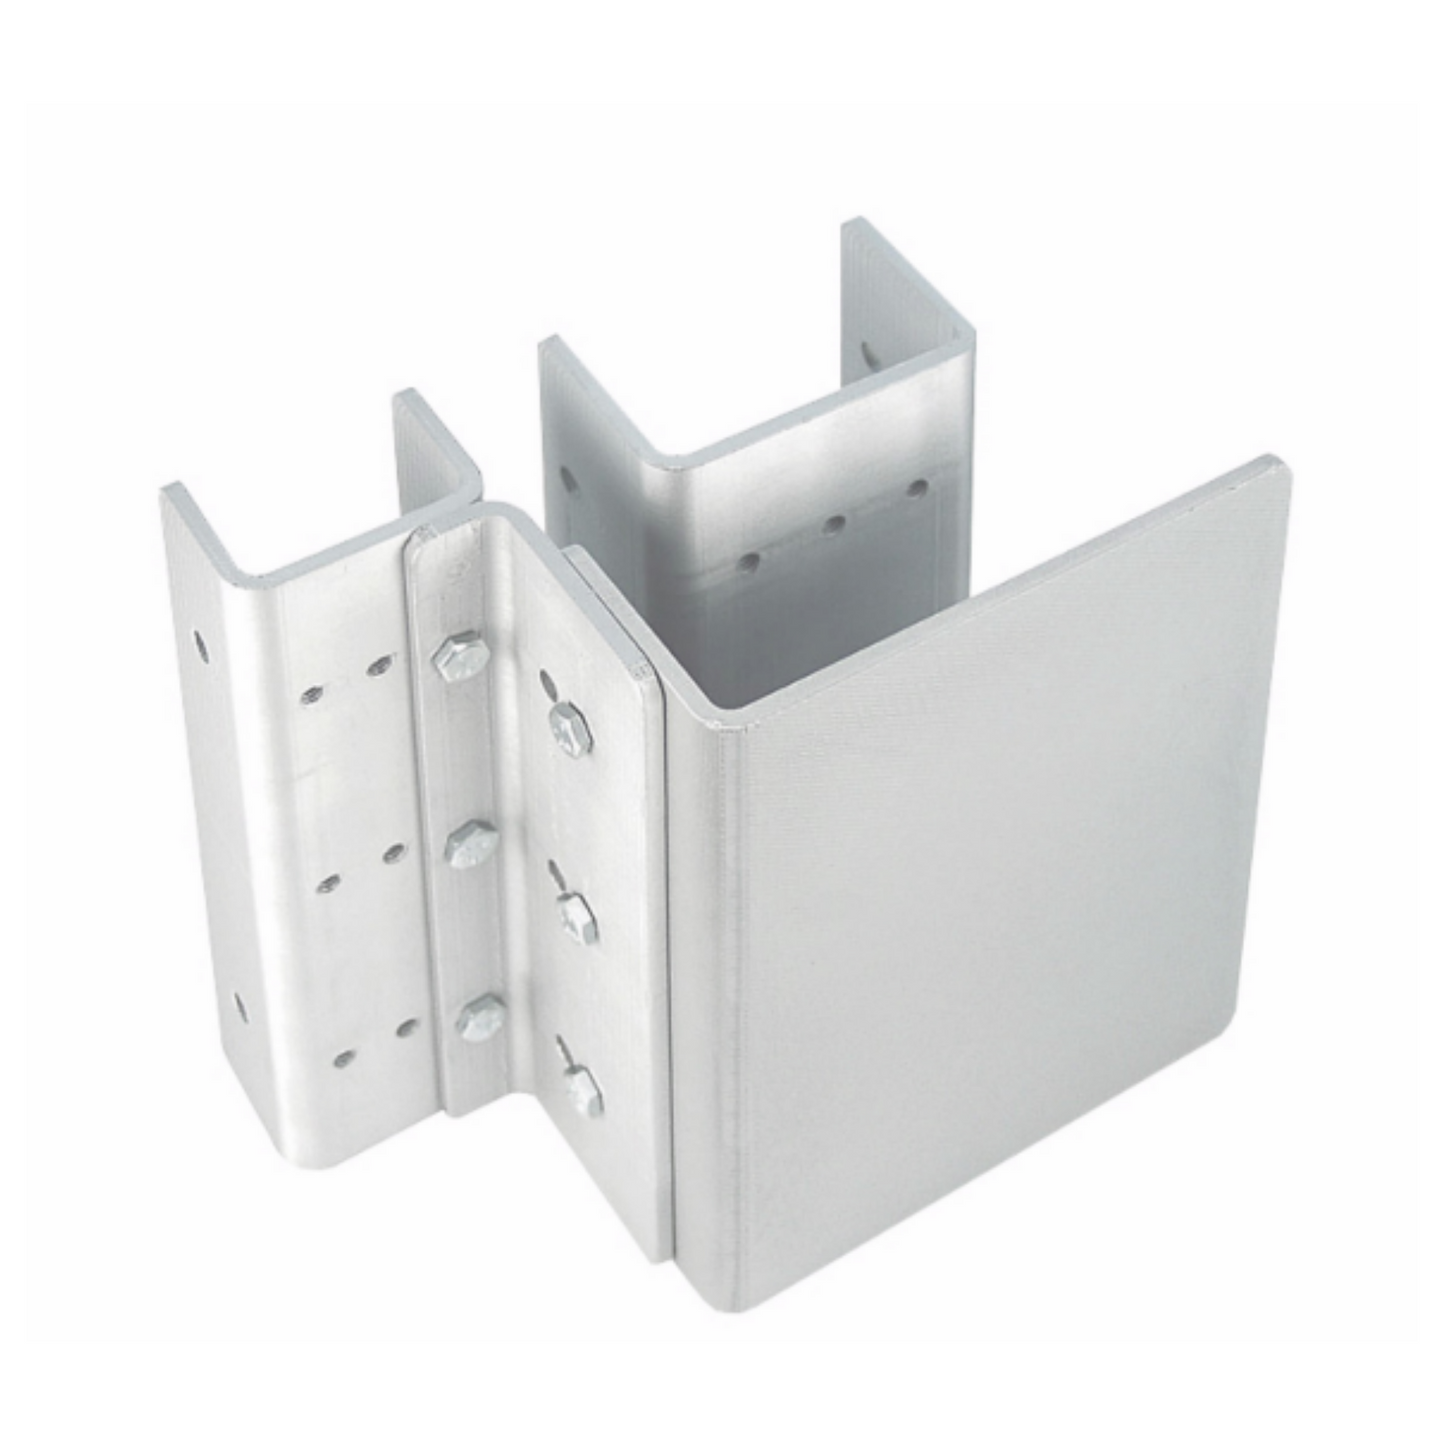 Post Shim Brackets are used to adapt both small and large Post Brackets to pole/post sizes smaller than 2" or 3" respectively in 1/8" increments - 1-7/8", 1-3/4", 1-5/8" 2-7/8", 2-3/4", 2-5/8", etc. When more than two shims are used together on a single post, welding the bracket to the pole/post is recommended. All necessary mounting hardware including four Post Shims is included with each Flex-Mount Kit.